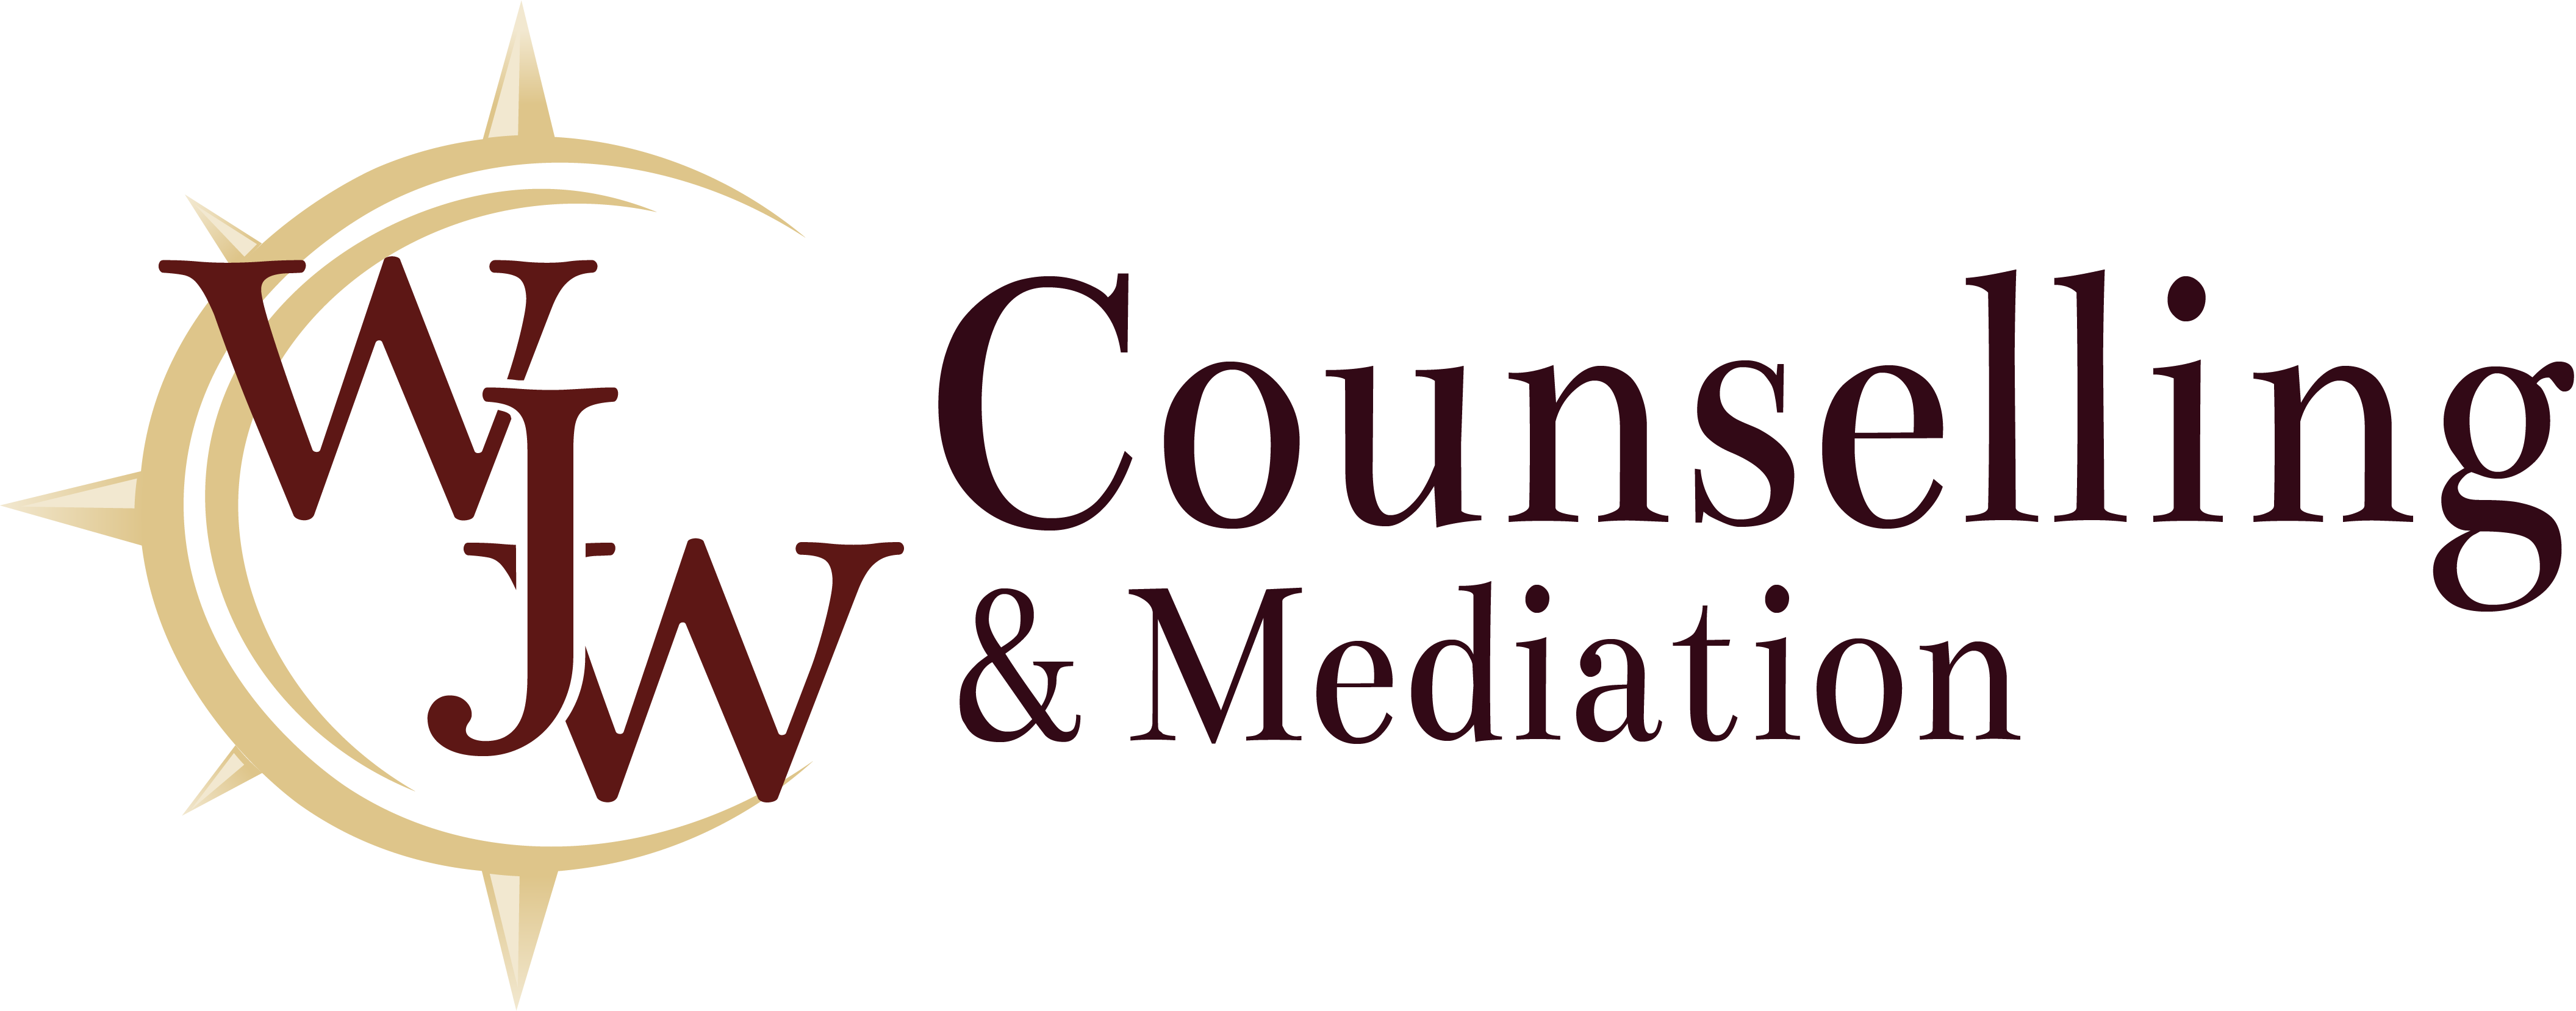 WJW Counselling & Mediation